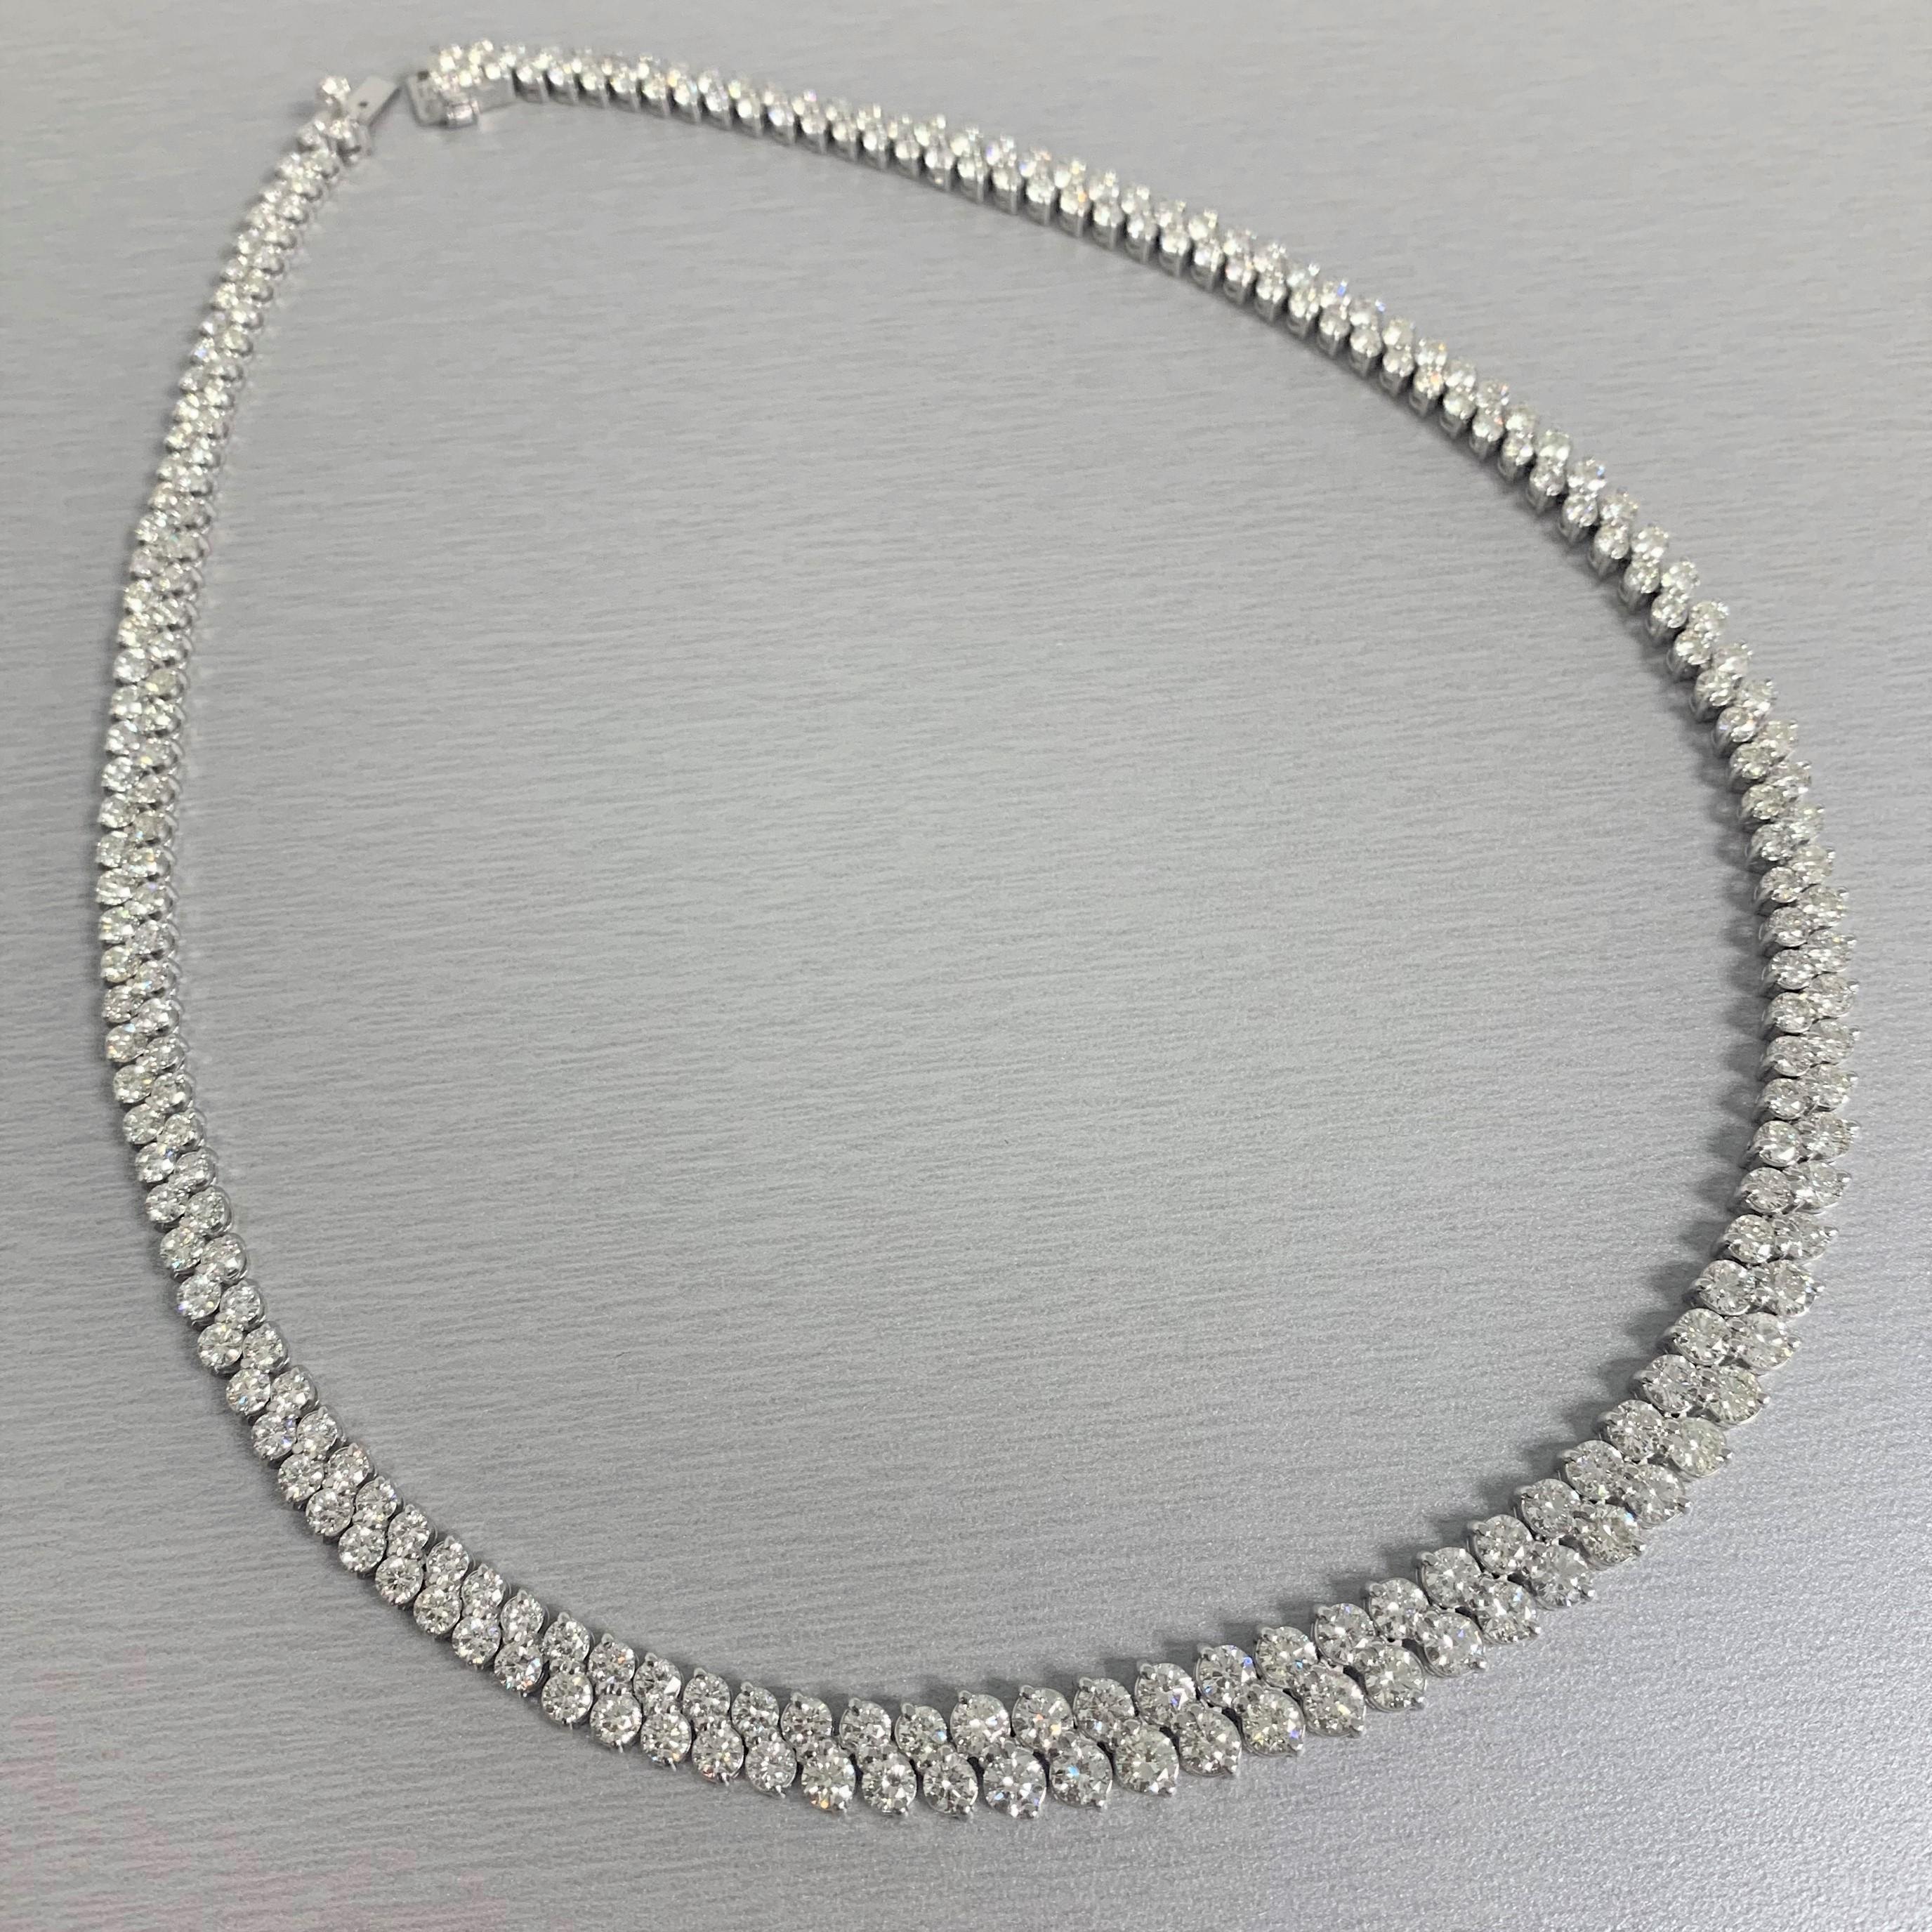 Unconventional and sassy, this Riviera Necklace is absolutely dazzling. With 2 rows of diamonds joint together at an angle, the necklace has a non traditional 'wow' to it.

Total Diamond Weight: 23.96 ct 
Diamond Color: H - J
Diamond Clarity: VS -